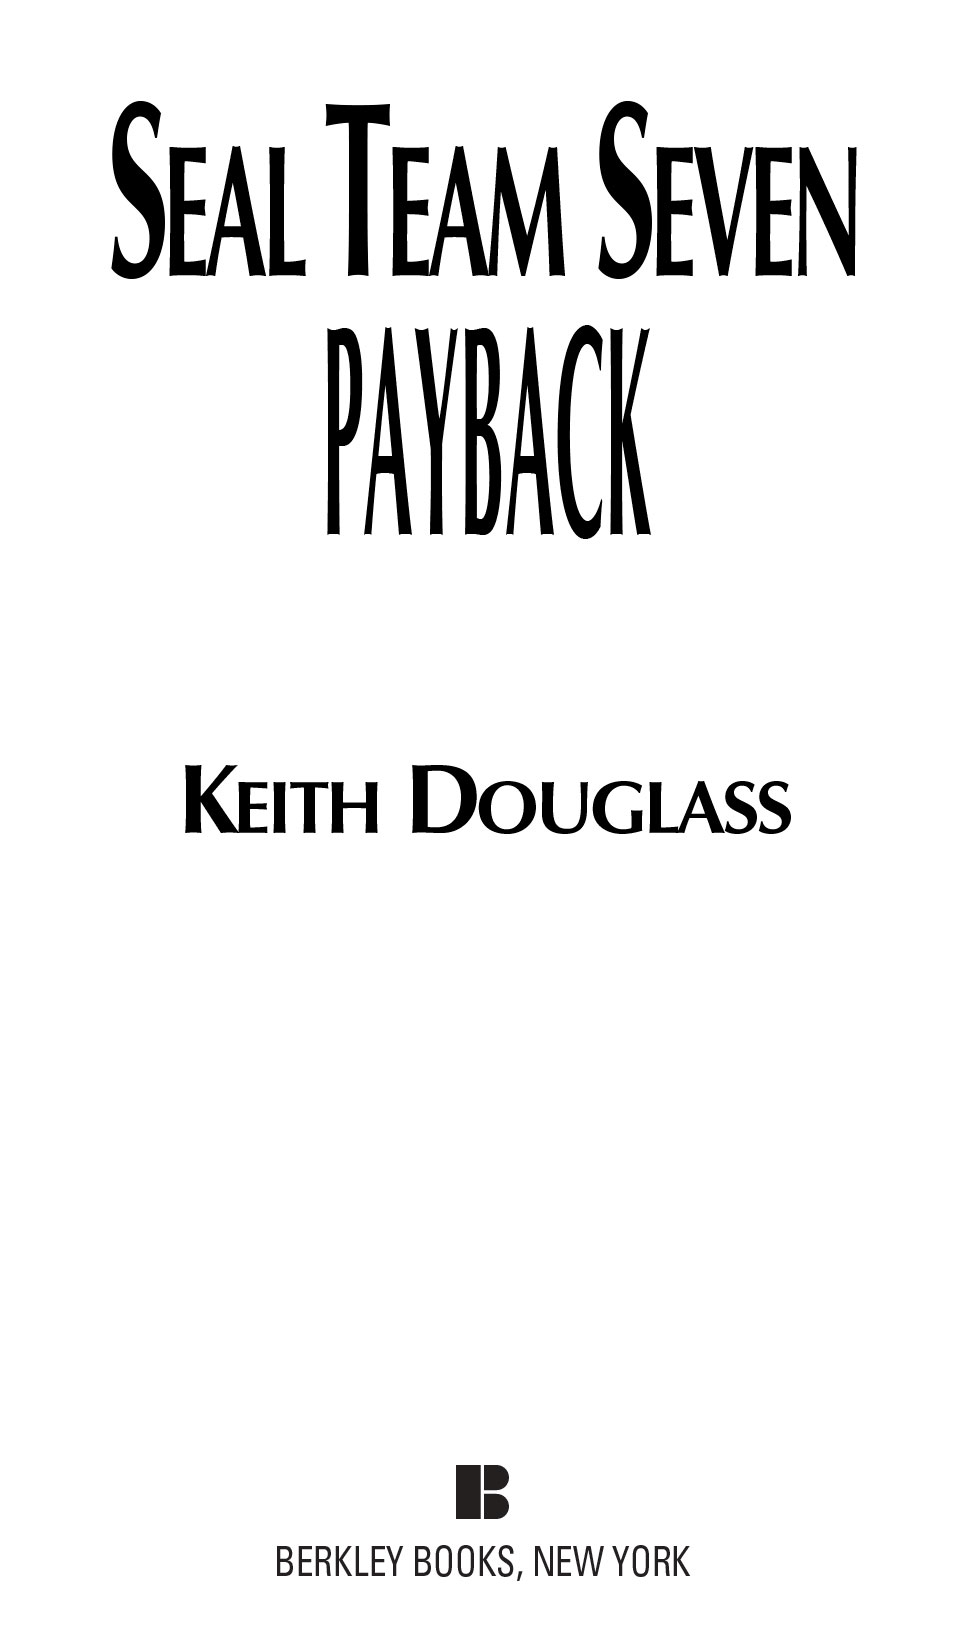 Payback by Keith Douglass